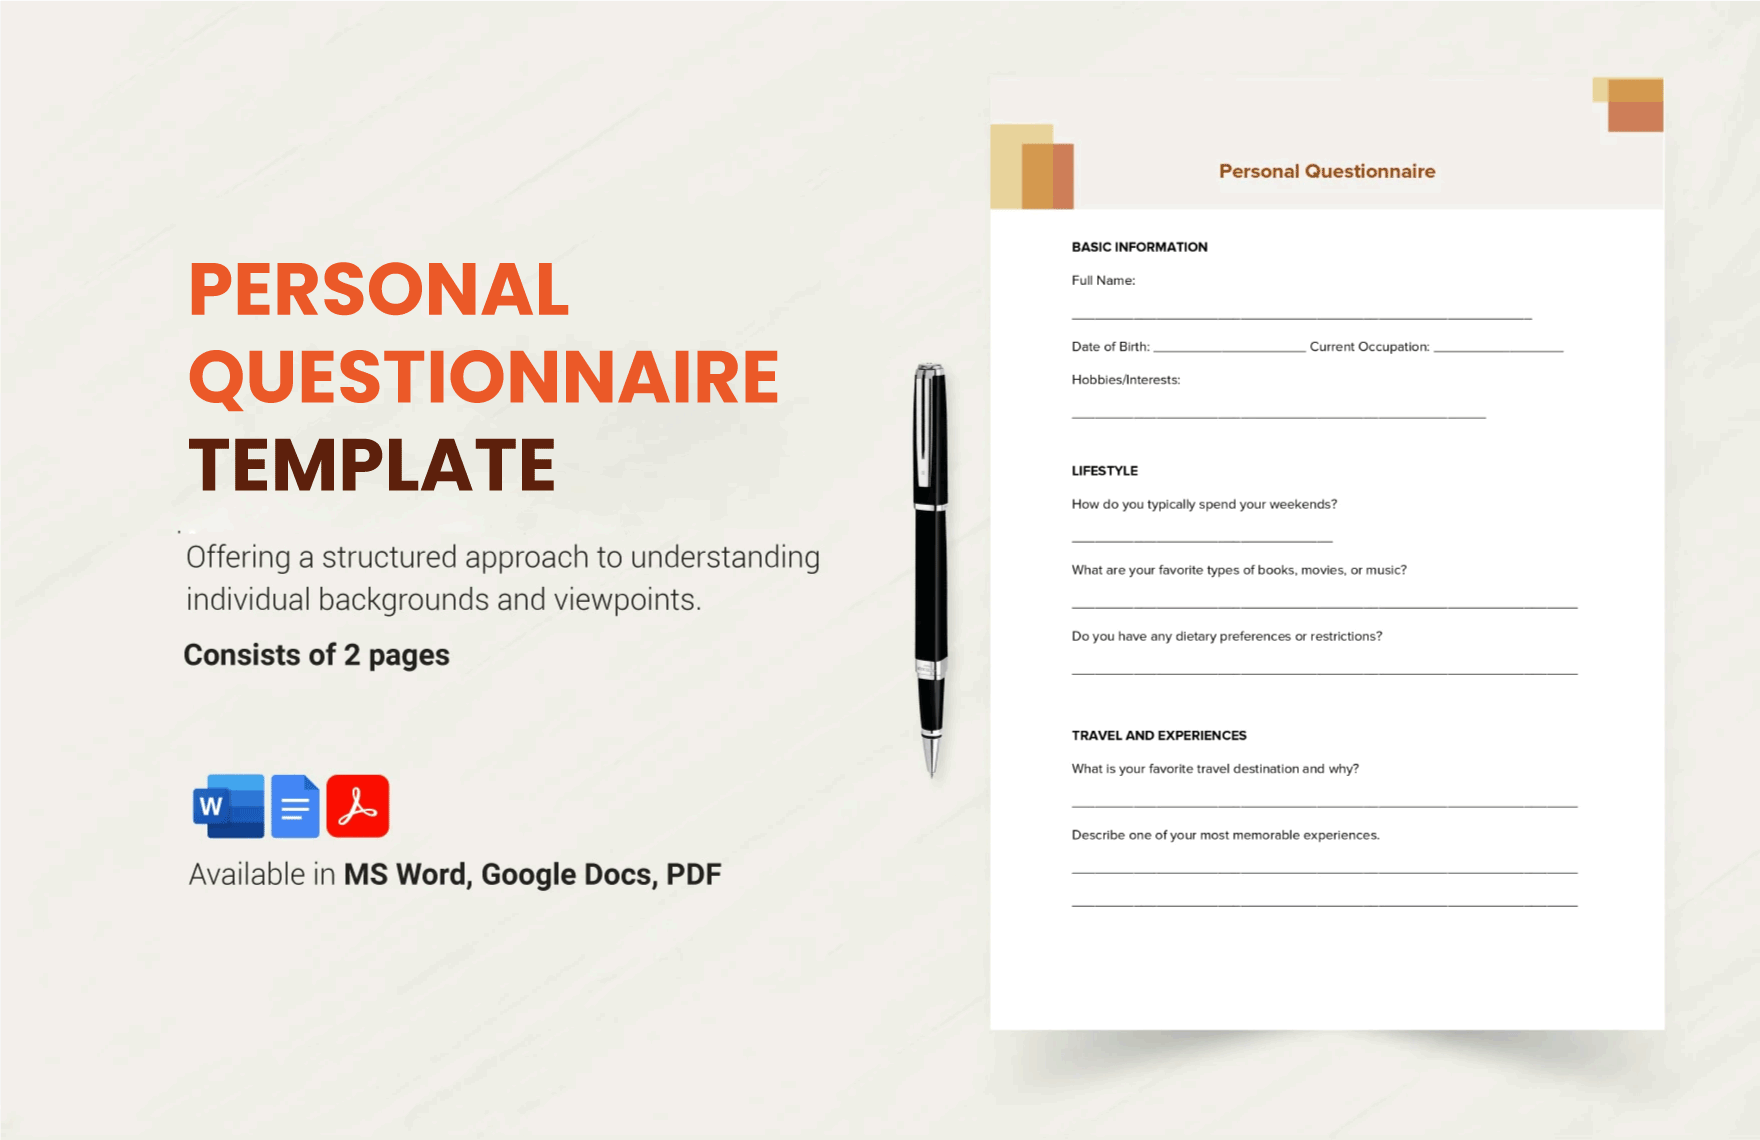 Free Personal Questionnaire Template in Word, Google Docs, PDF